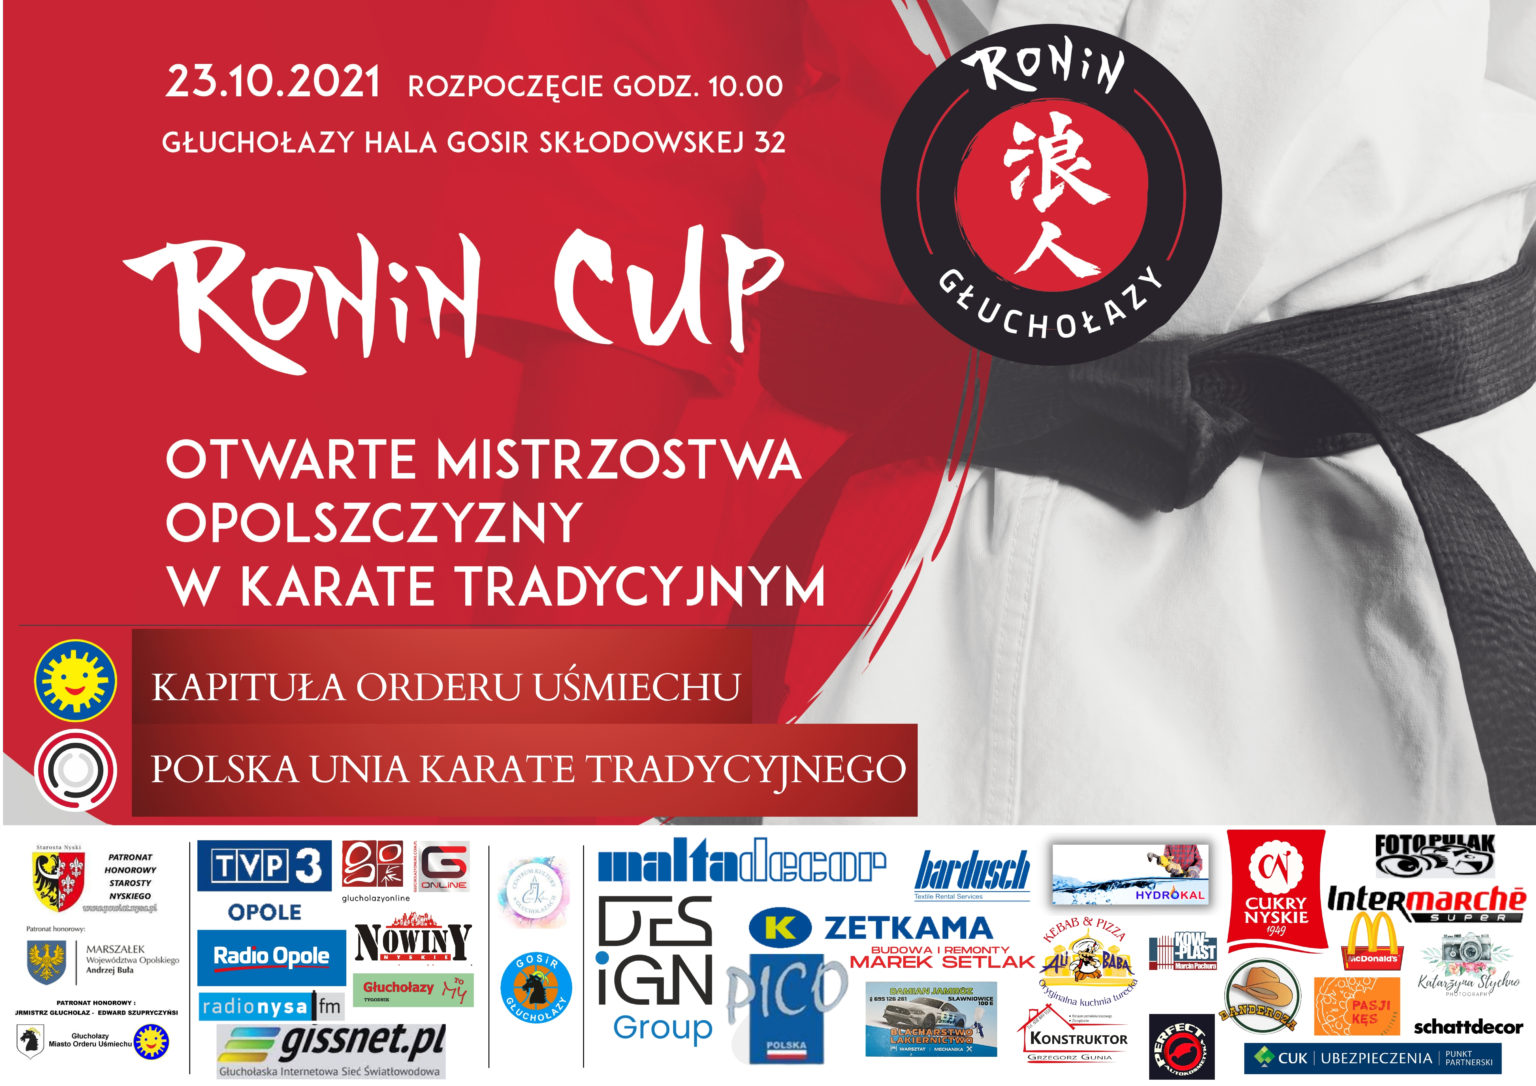 RONIN-CUP